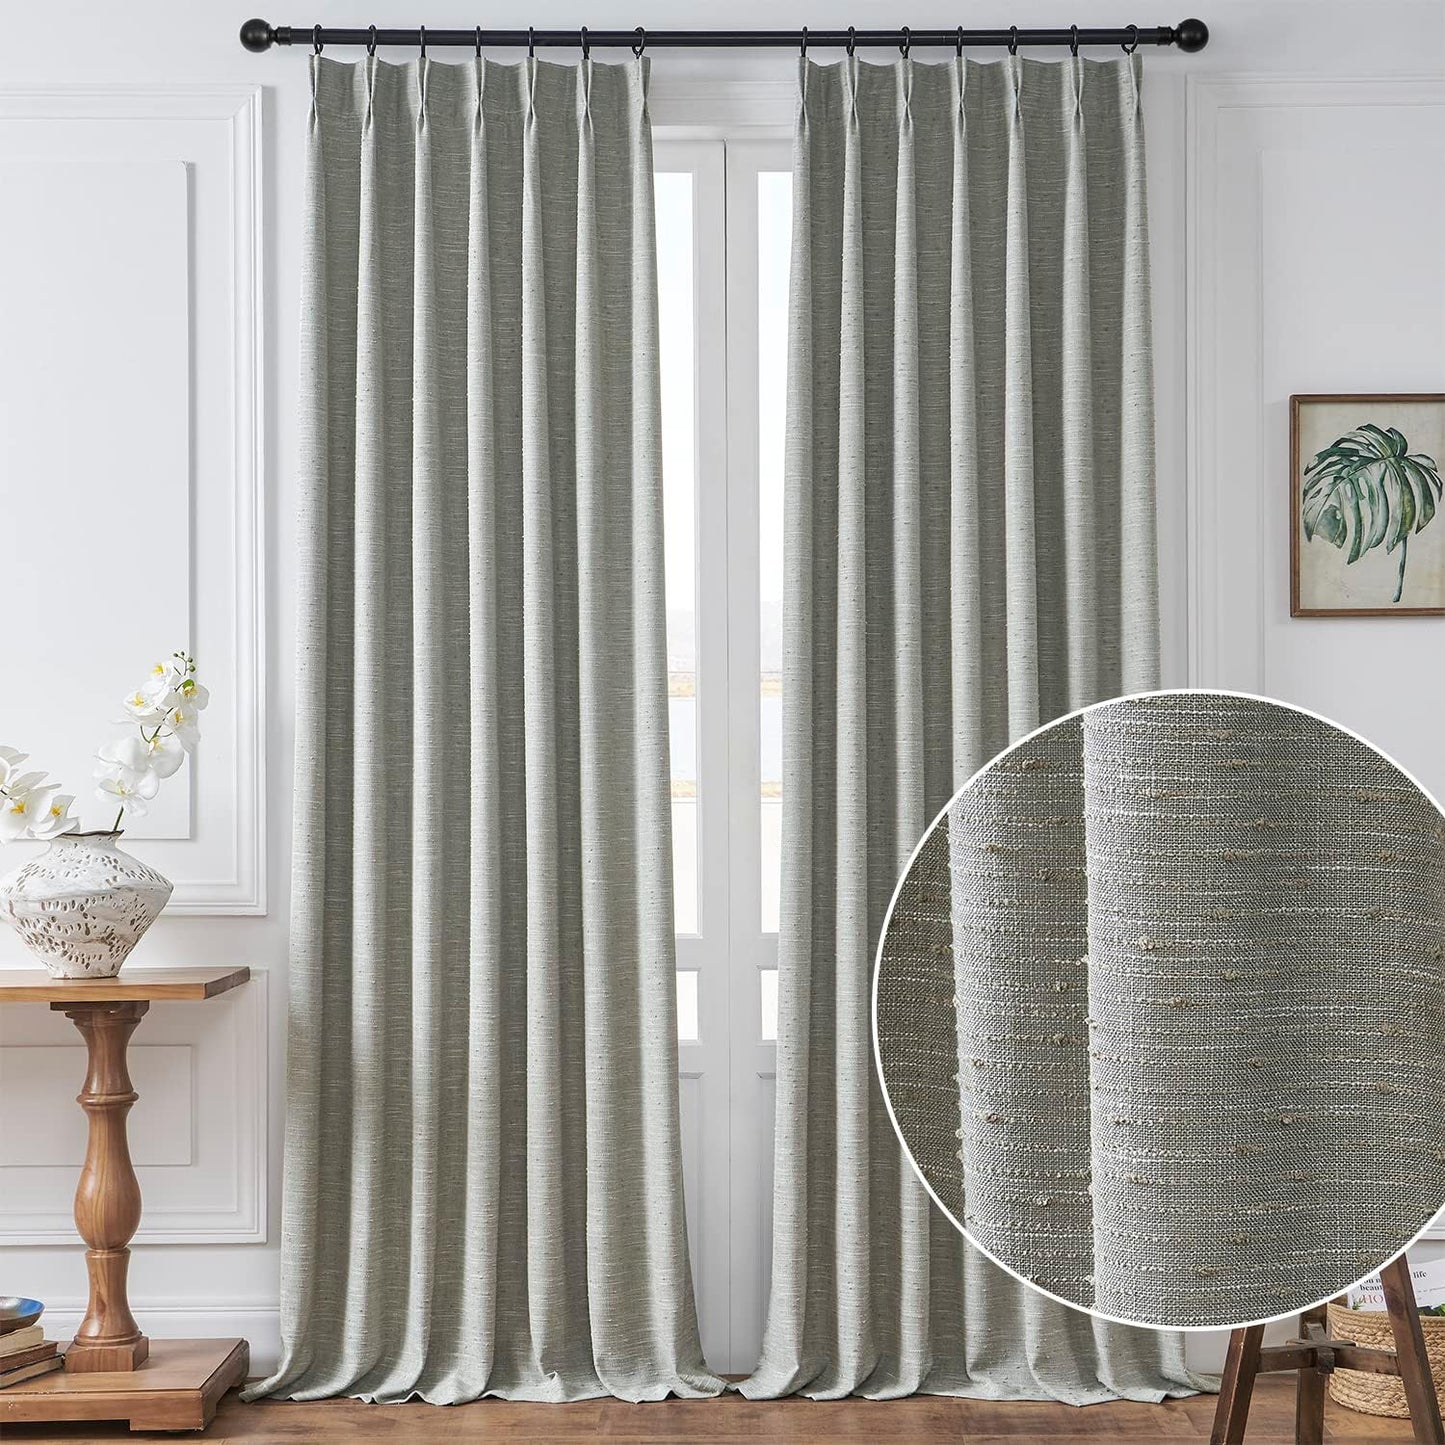 Maison Colette Pinch Pleat White Natural Linen Curtain 84 Inches Length for Bedroom,Back Tab Semi Sheer Window Treatment Drapes for Living Room,2 Panels,40" Width  Maison Colette Home Grey 40"W X 95"L With Liner 